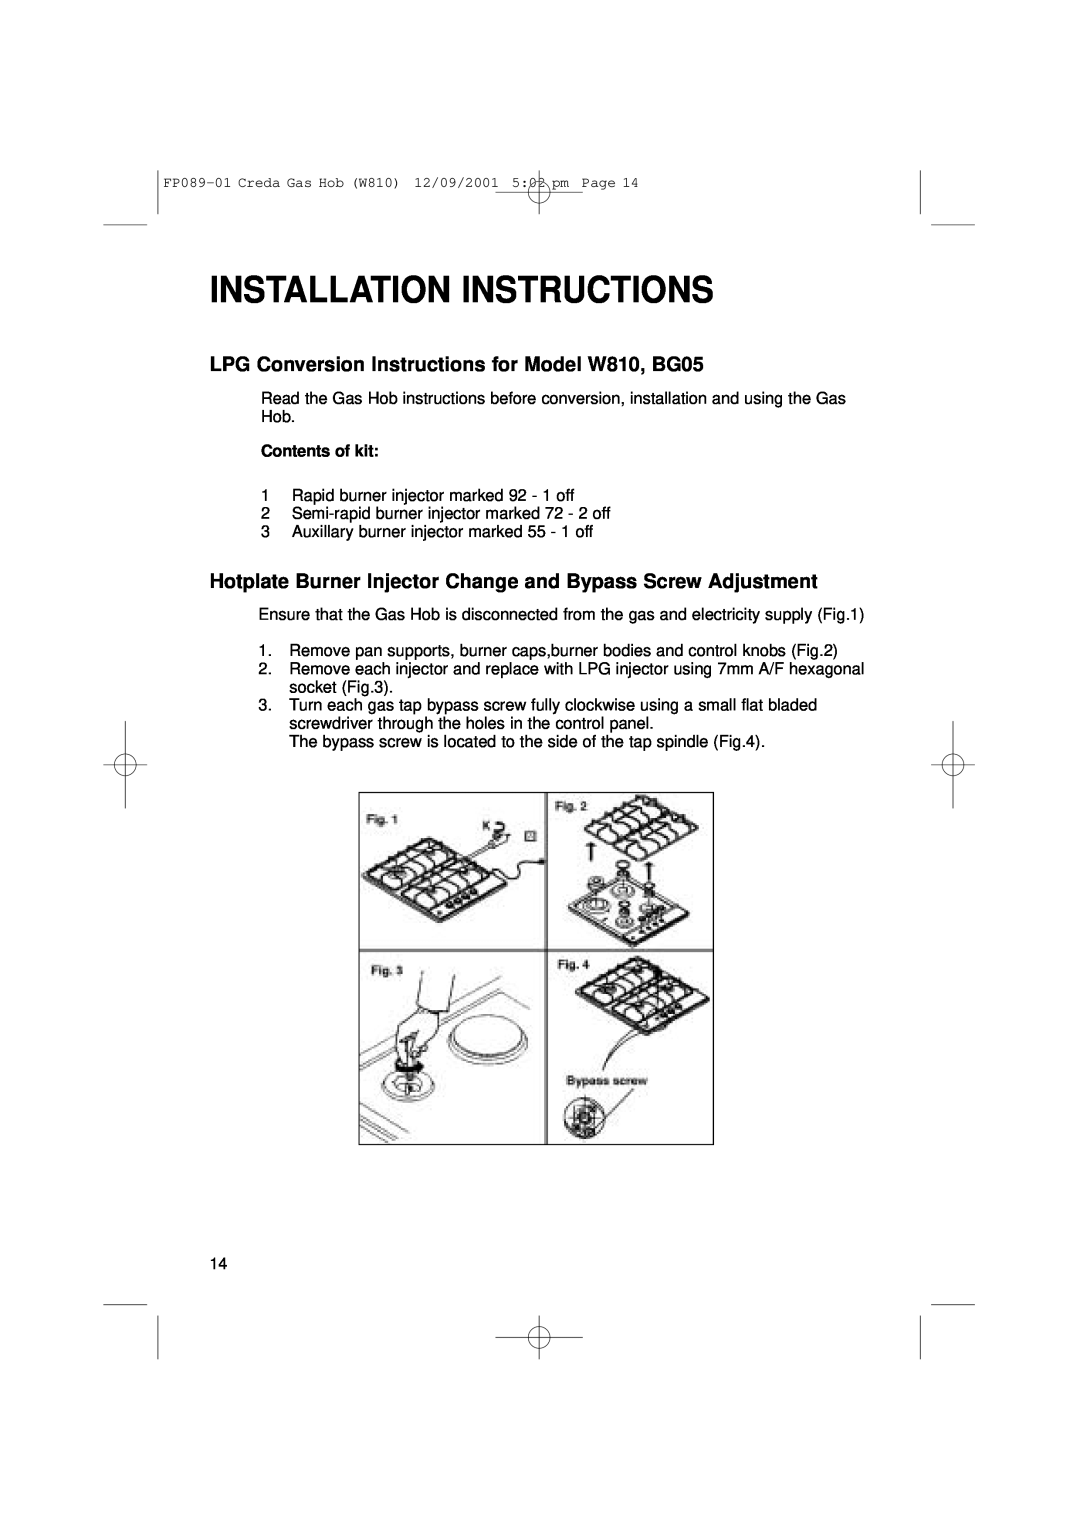 Creda LPG Conversion Instructions for Model W810, BG05, Hotplate Burner Injector Change and Bypass Screw Adjustment 